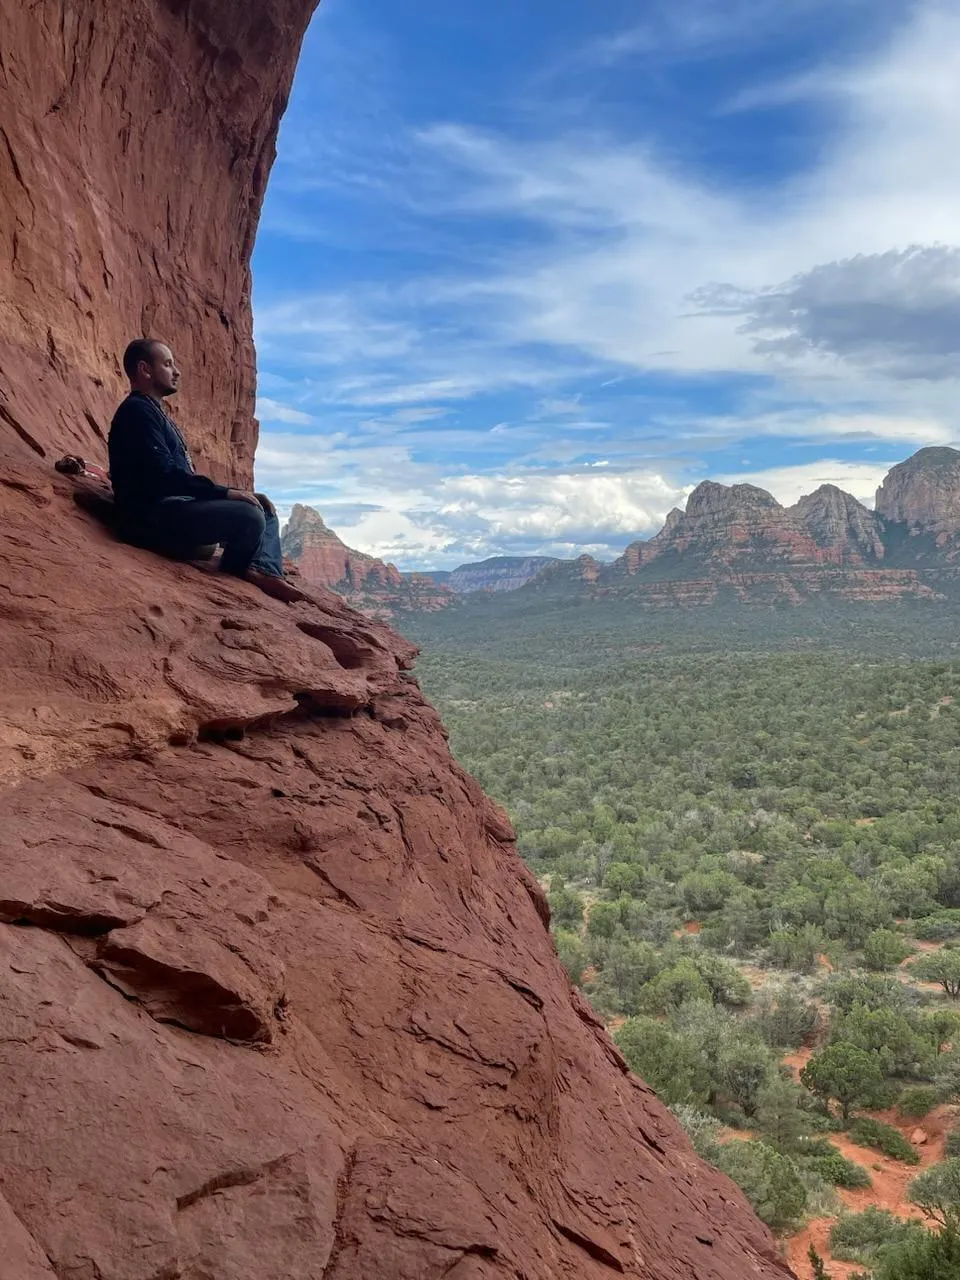 Photo of a male owner, who is a Reiki master, shamanic practitioner, and Kambo facilitator, taken at the Birthing Canal in Sedona, Arizona. He is depicted in natural outdoor surroundings, characteristic of the red rock formations of Sedona, enhancing the spiritual and healing ambiance. His attire is casual yet respectful, suitable for a shamanic and Reiki practitioner, and he exudes an aura of calmness and wisdom. The unique landscape of the Birthing Canal provides a powerful and symbolic backdrop, reflecting his deep connection to nature and spiritual practices. His pose and expression convey a sense of groundedness and profound knowledge in his diverse healing modalities.